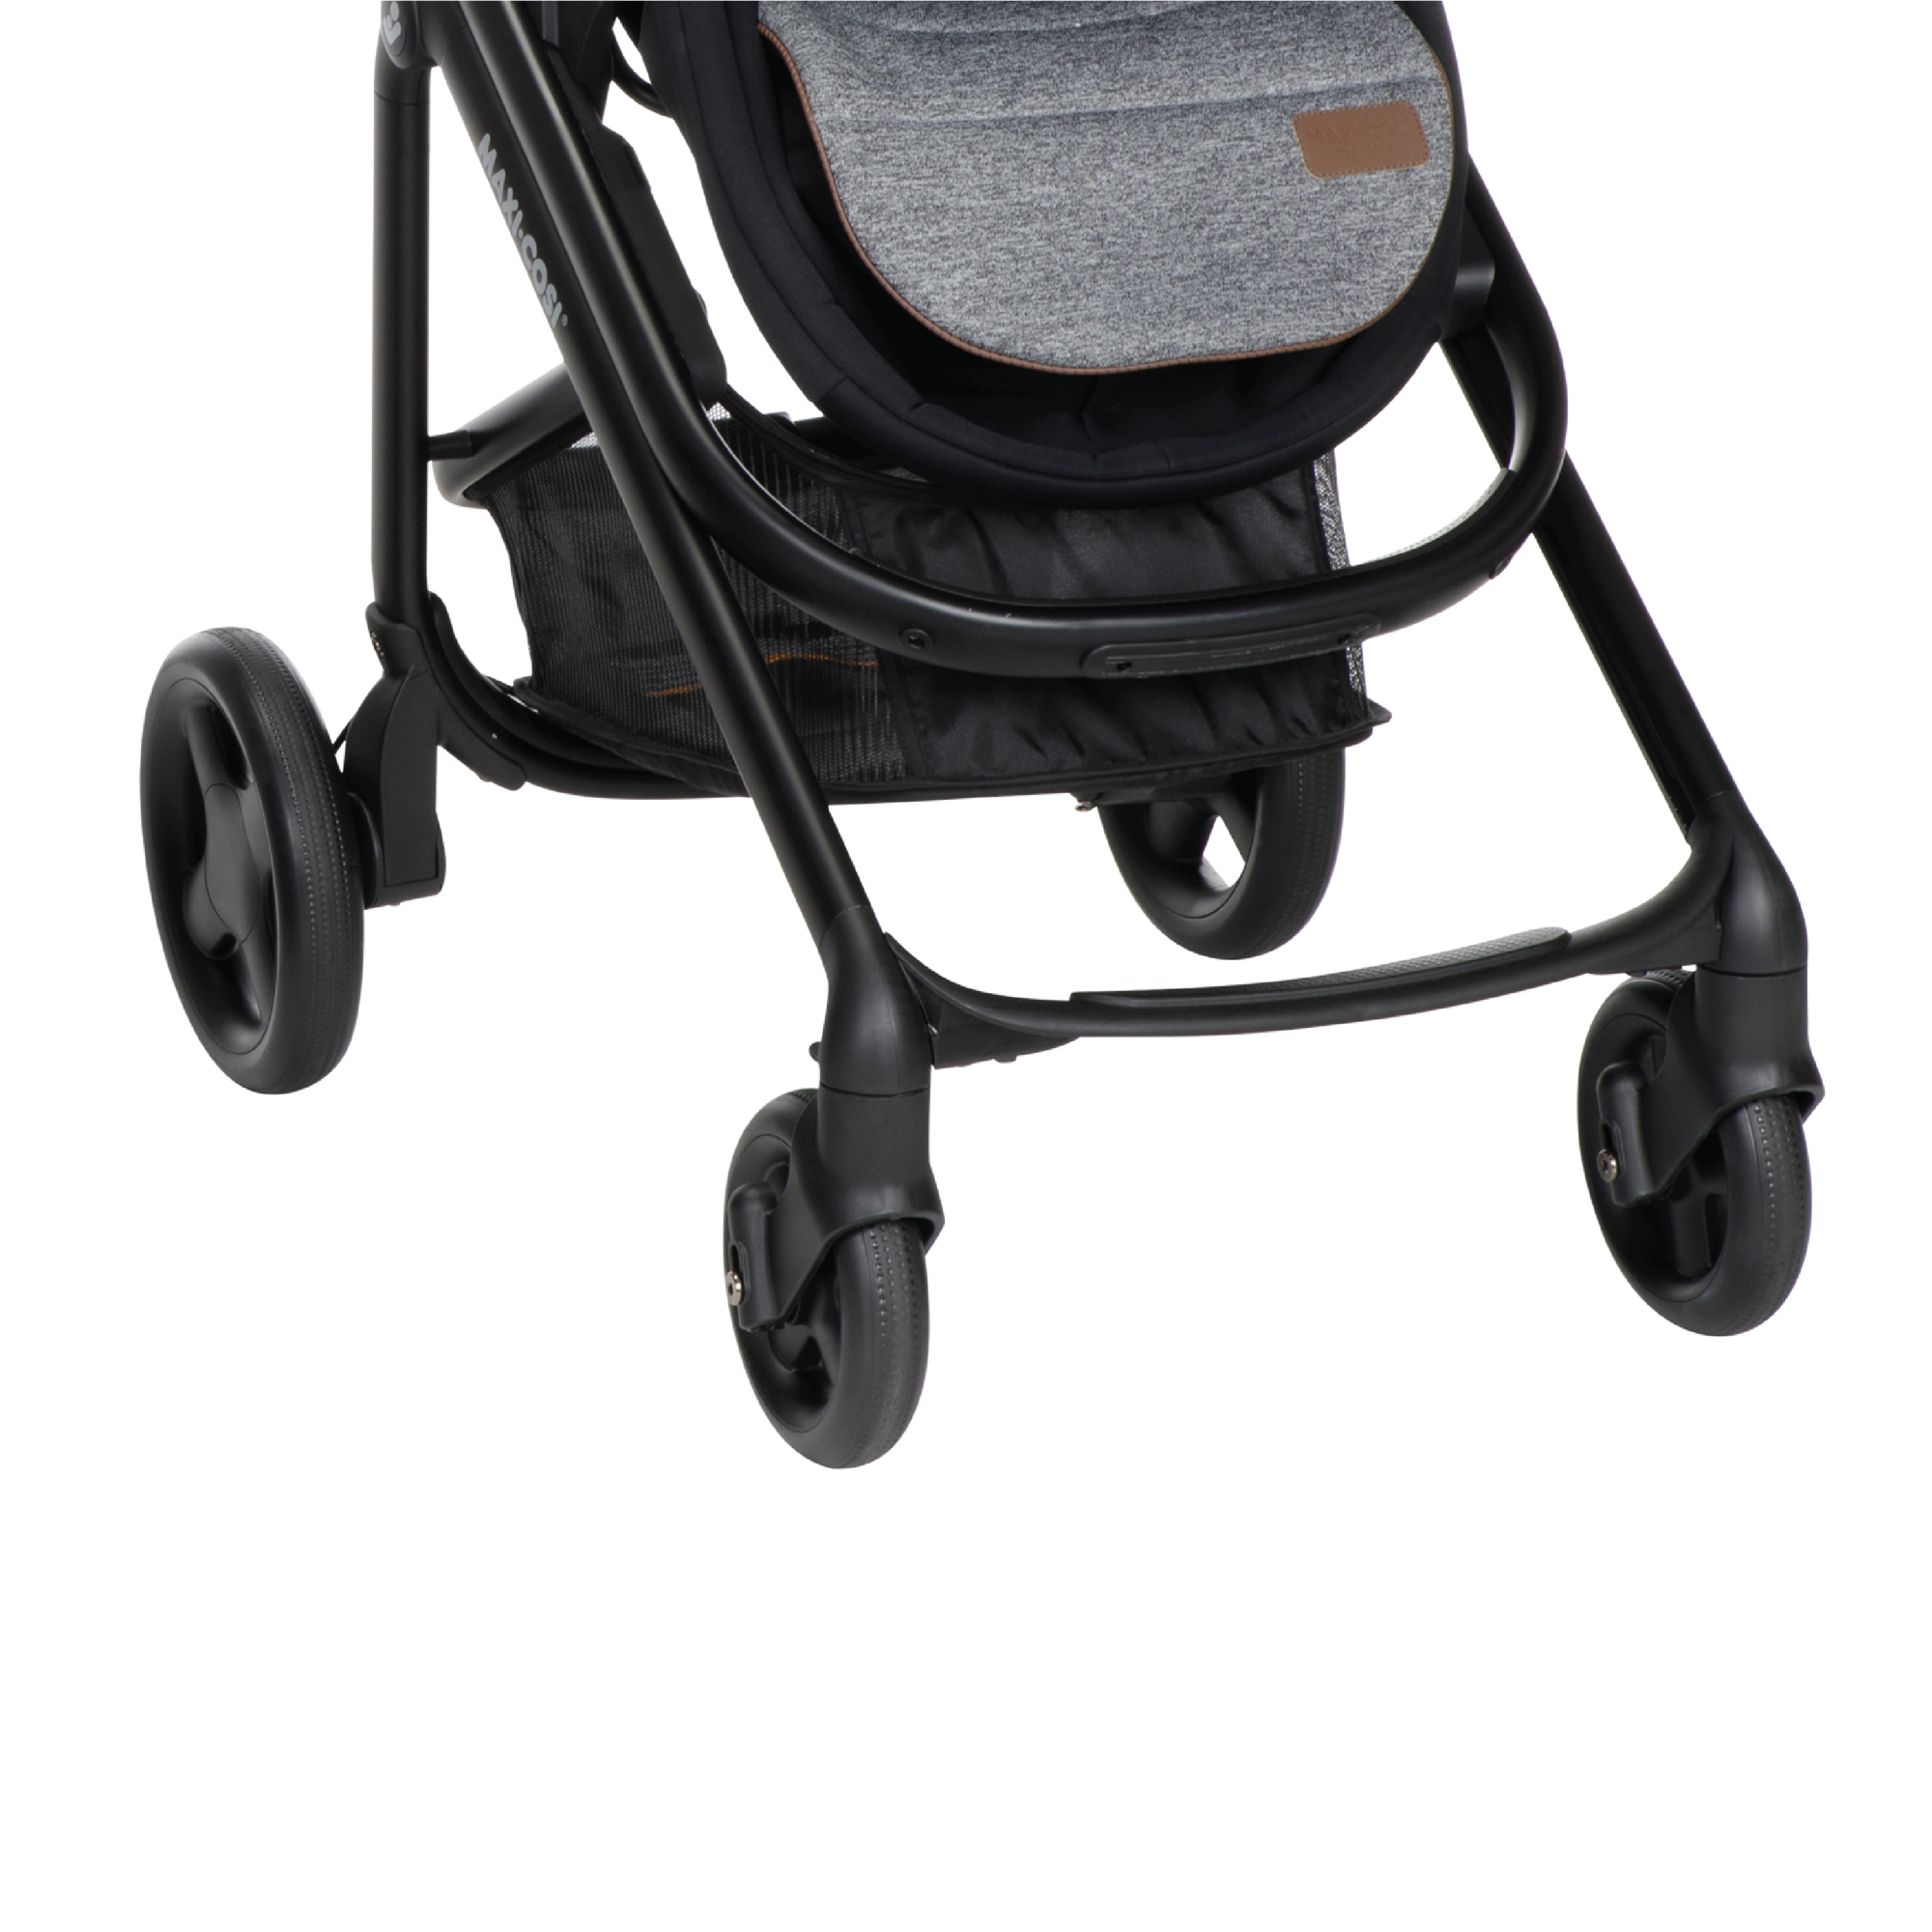 Tayla Max Modular Stroller - Onyx Wonder - SmoothRide tire technology and all-wheel suspension for easy-maneuverability